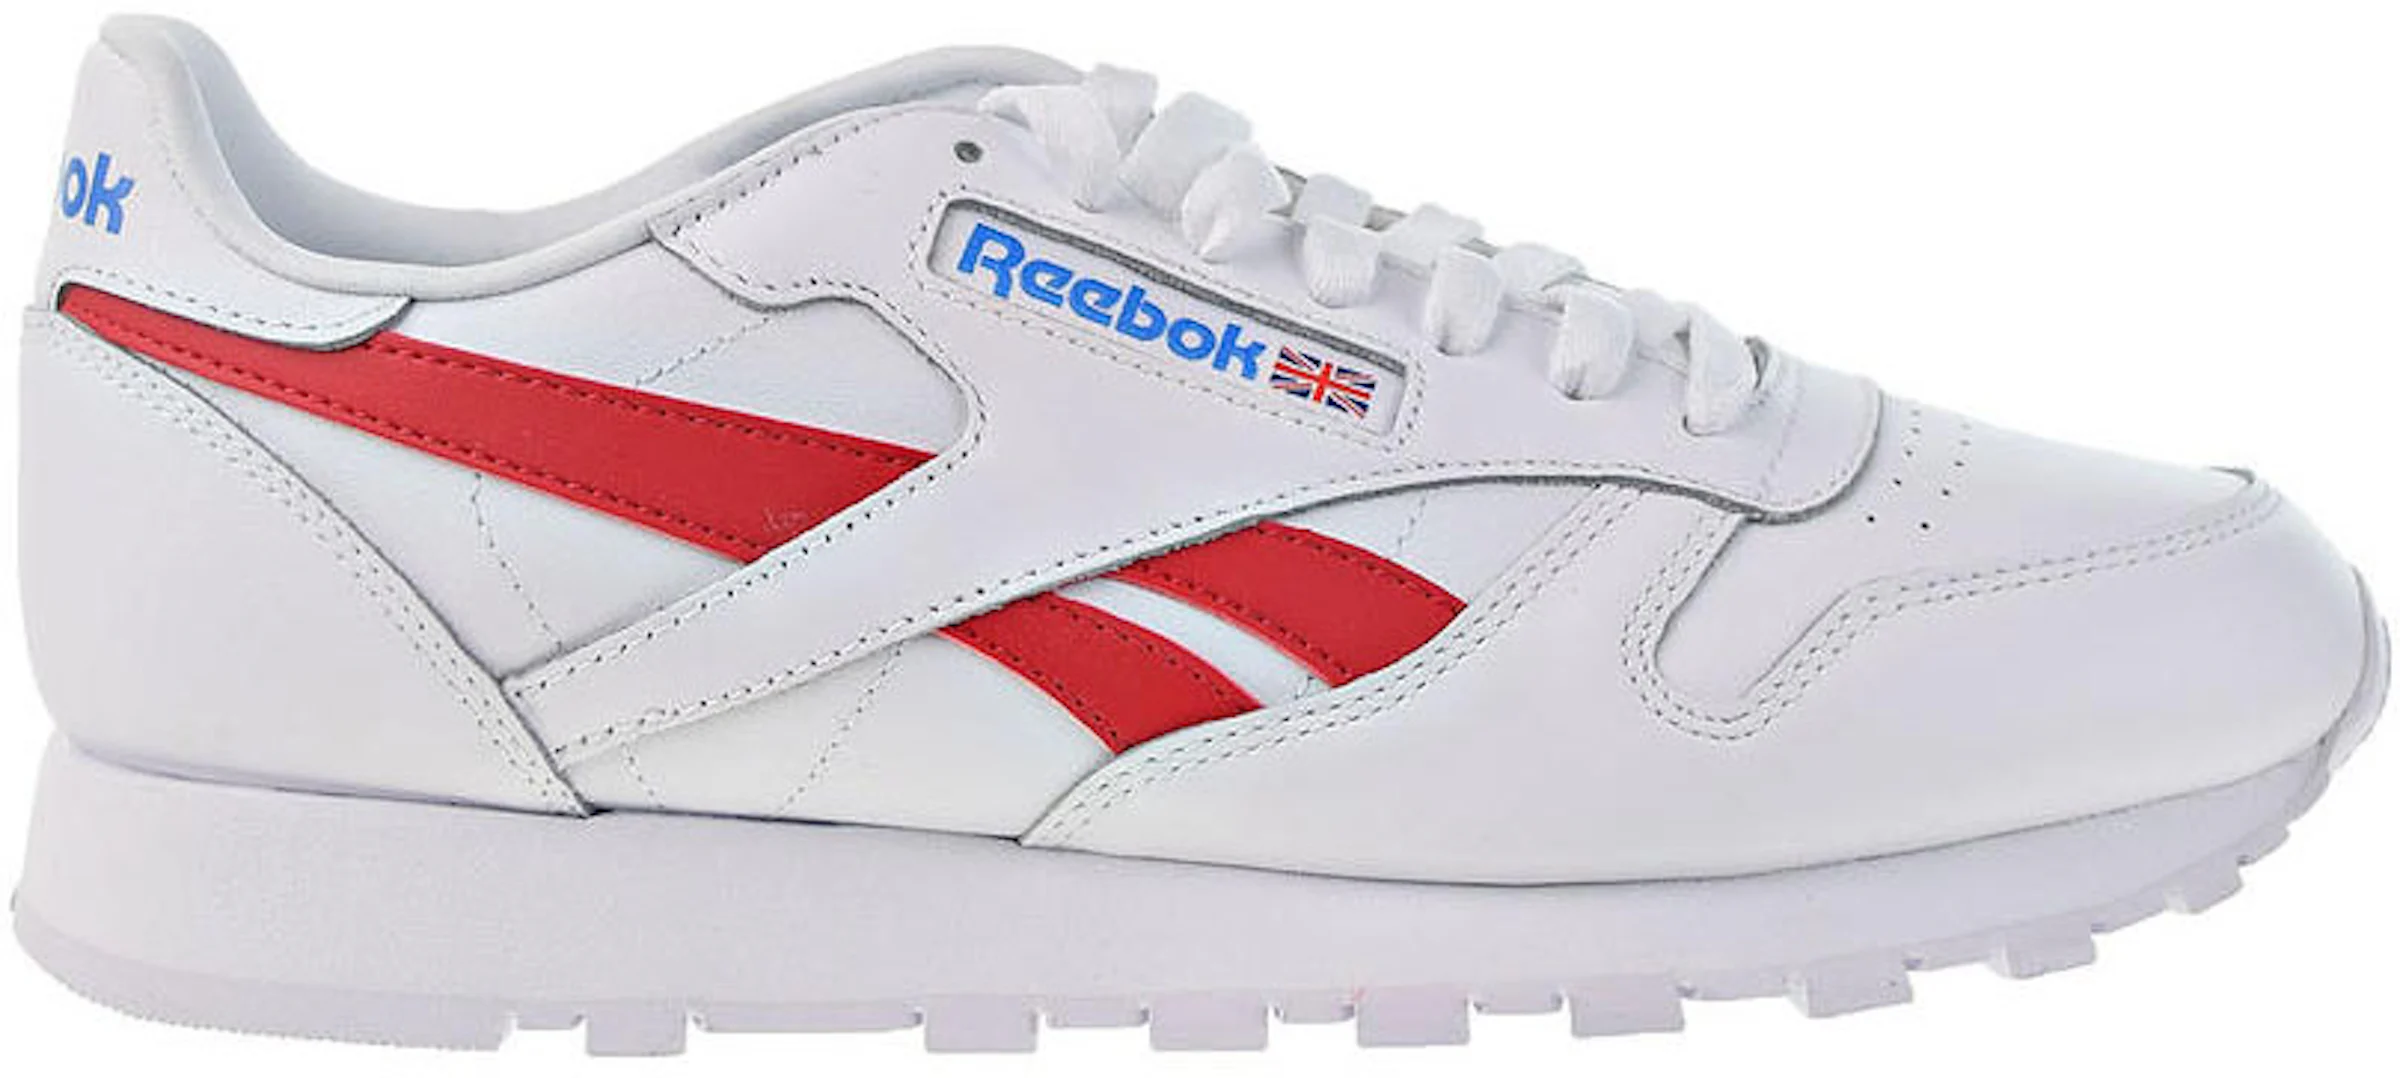 Men's sneakers and shoes Reebok Classic Leather Pump Ftw White/ Vector  Blue/ Vector Red